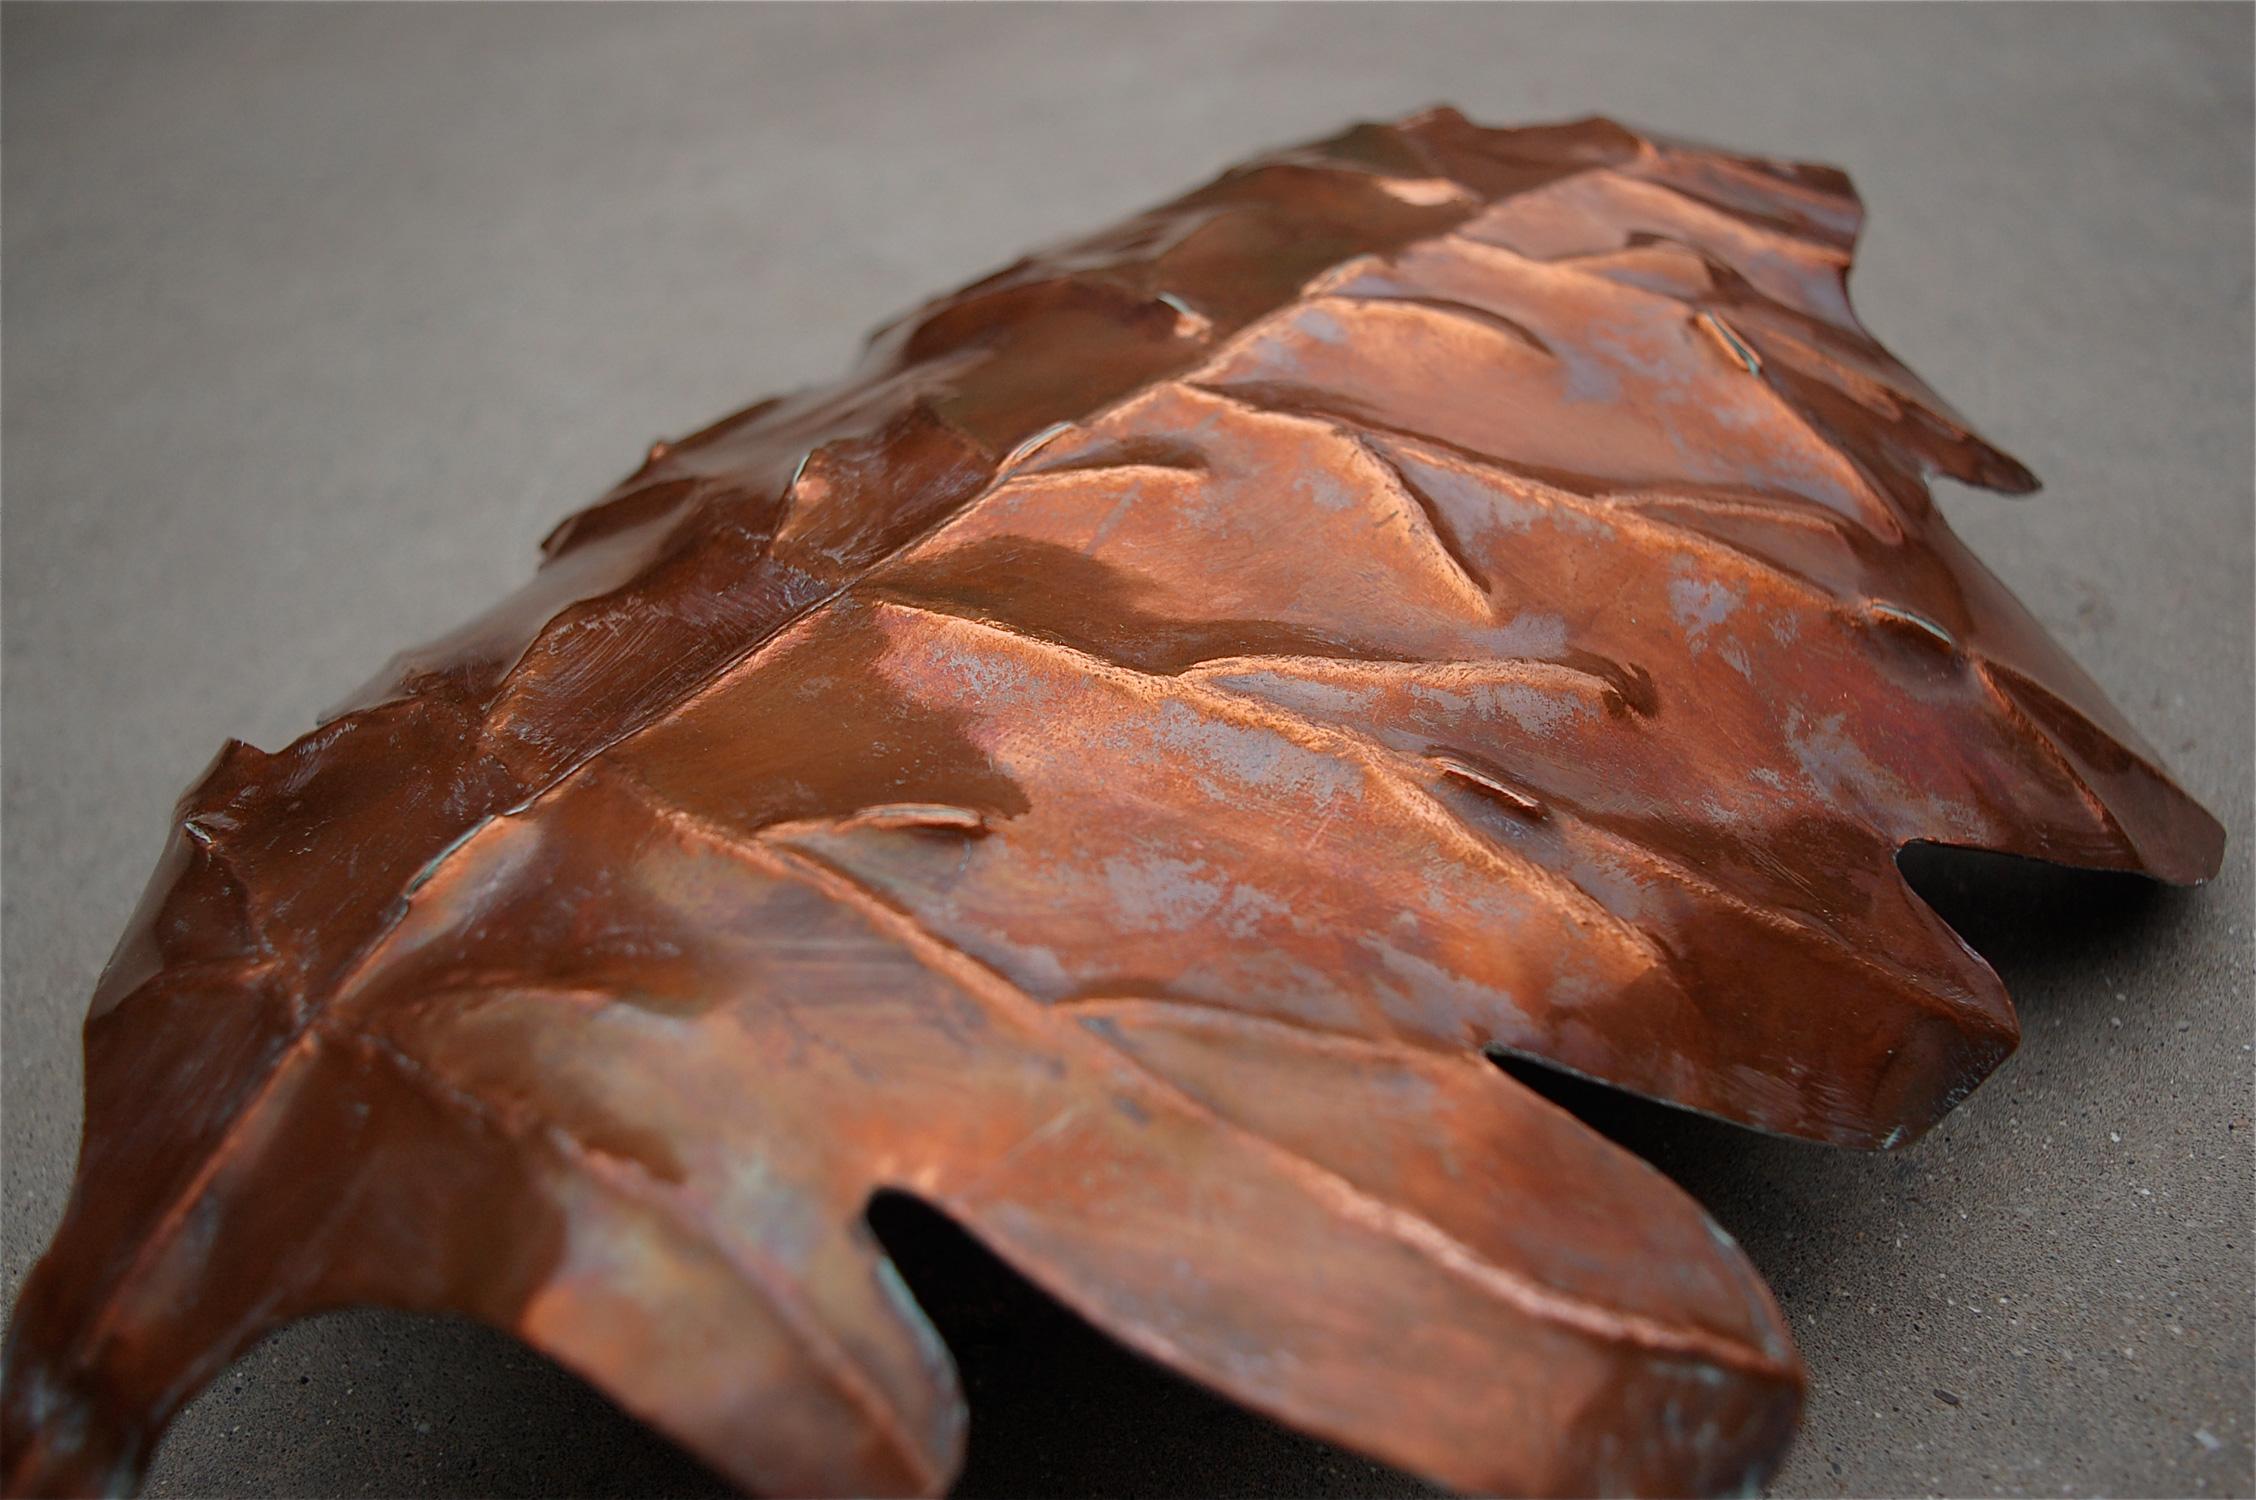 Artisan lighting, one-off piece. This handcrafted crafted wall lamp in the shape of an oak leaf is made of solid copper that has been hand-beaten and moulded into shape. The reflection of the light on the copper creates a cosy atmosphere and warm